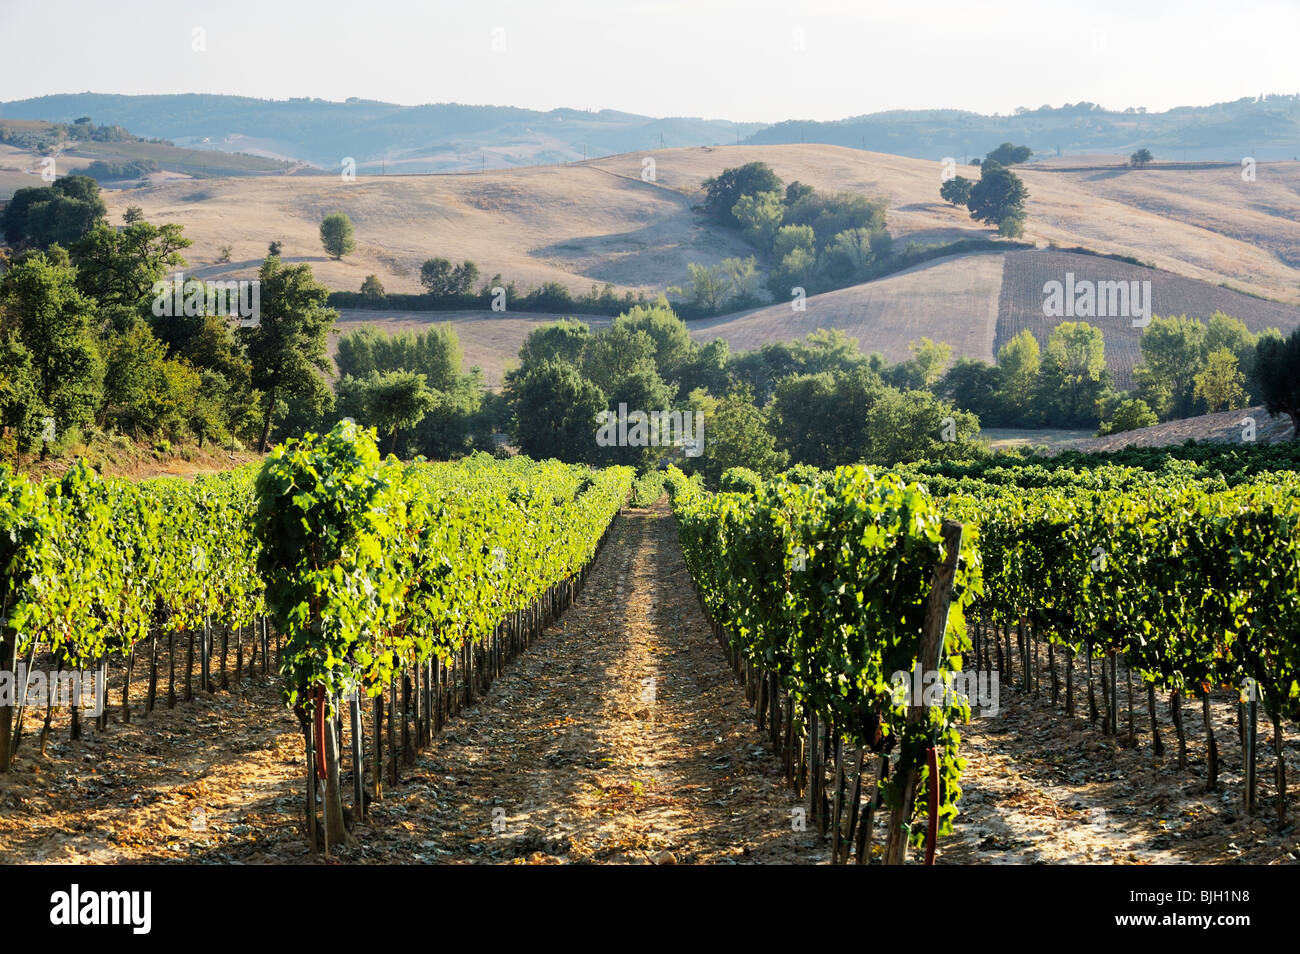 Vineyard landscape below the famous wine town of Montepulciano, Tuscany, Italy. September Stock Photo